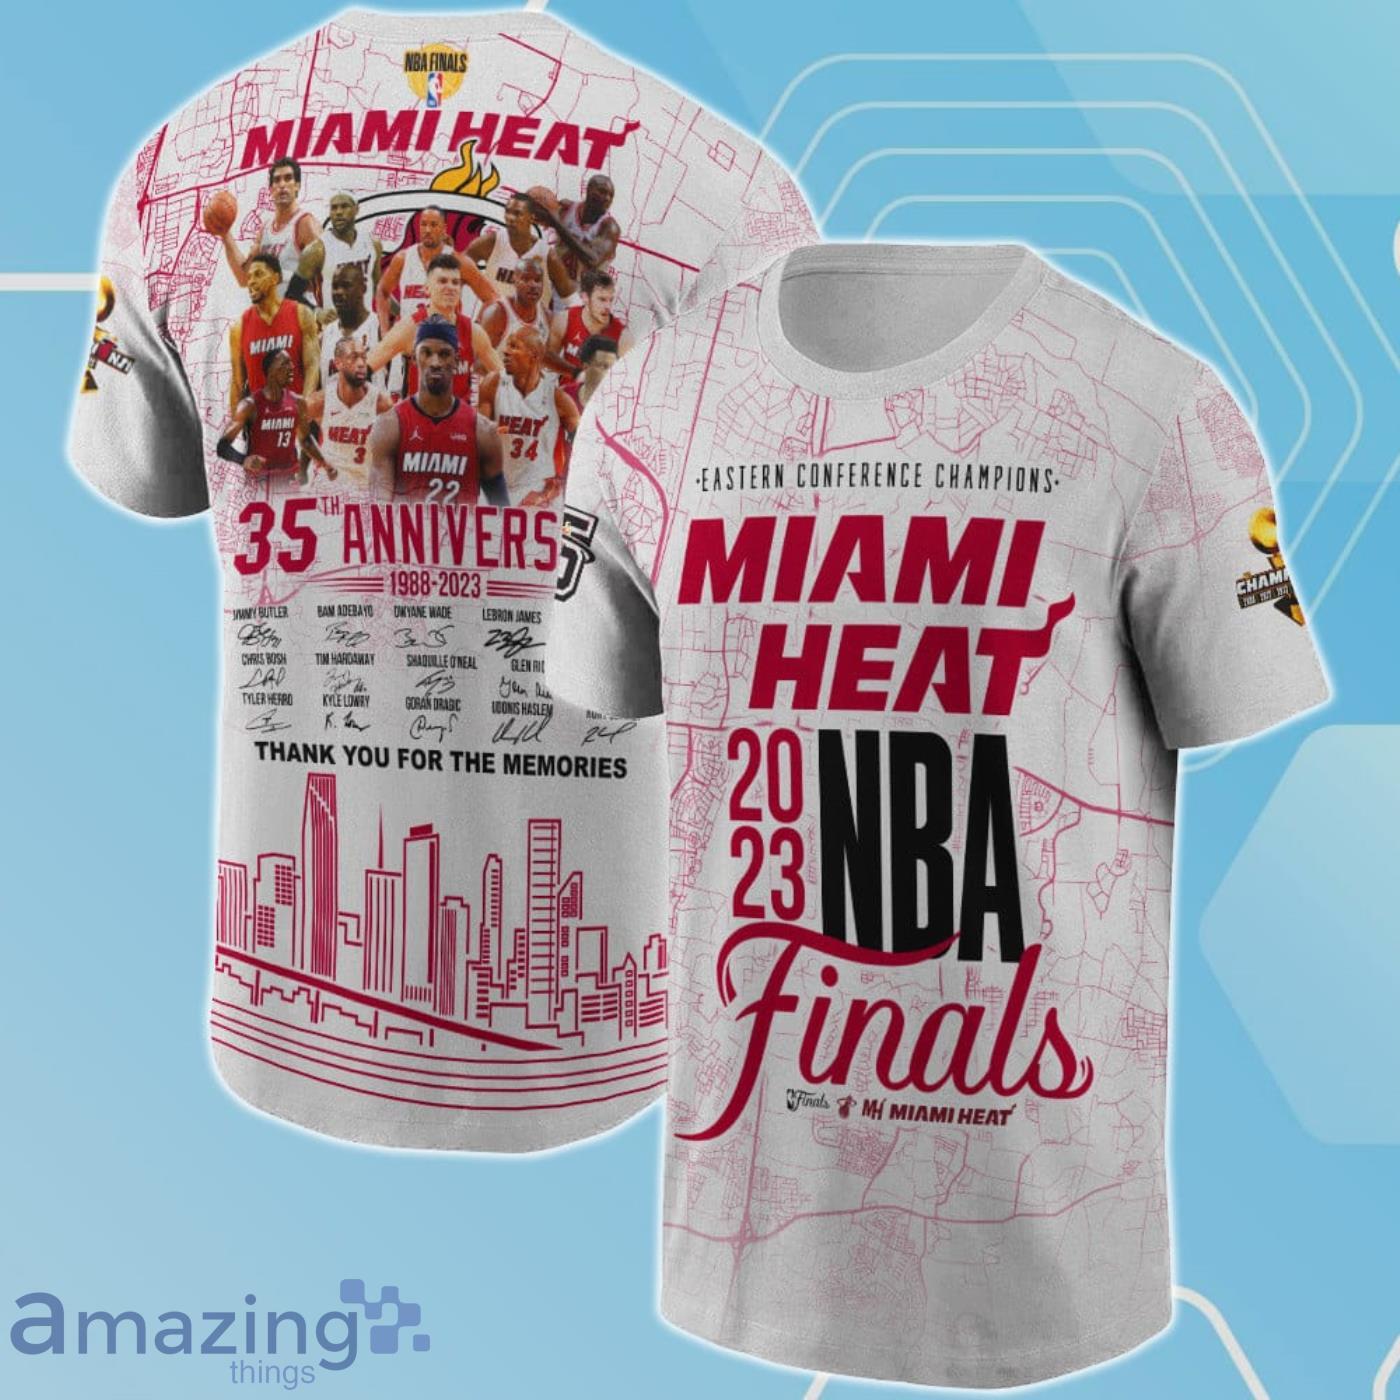 Miami Heat bringing back throwback jerseys from NBA debut in 1988